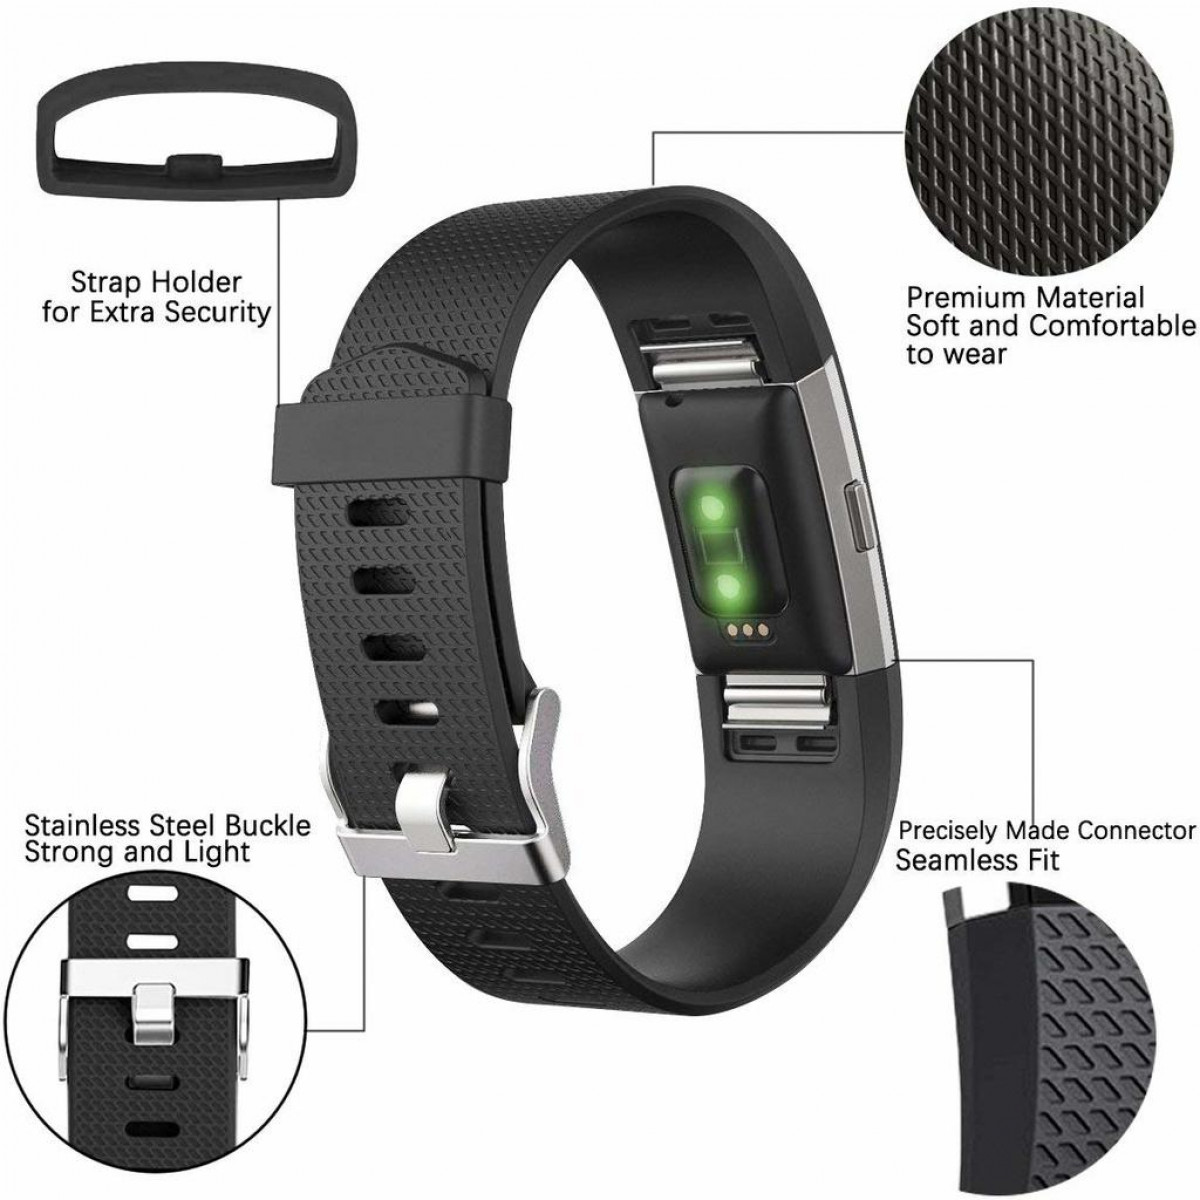 INF Fitbit Charge 2 schwarz/grau/weiß Charge 2 (S), (S), schwarz/grau/weiß 3er-Pack Armband Fitbit, Armband